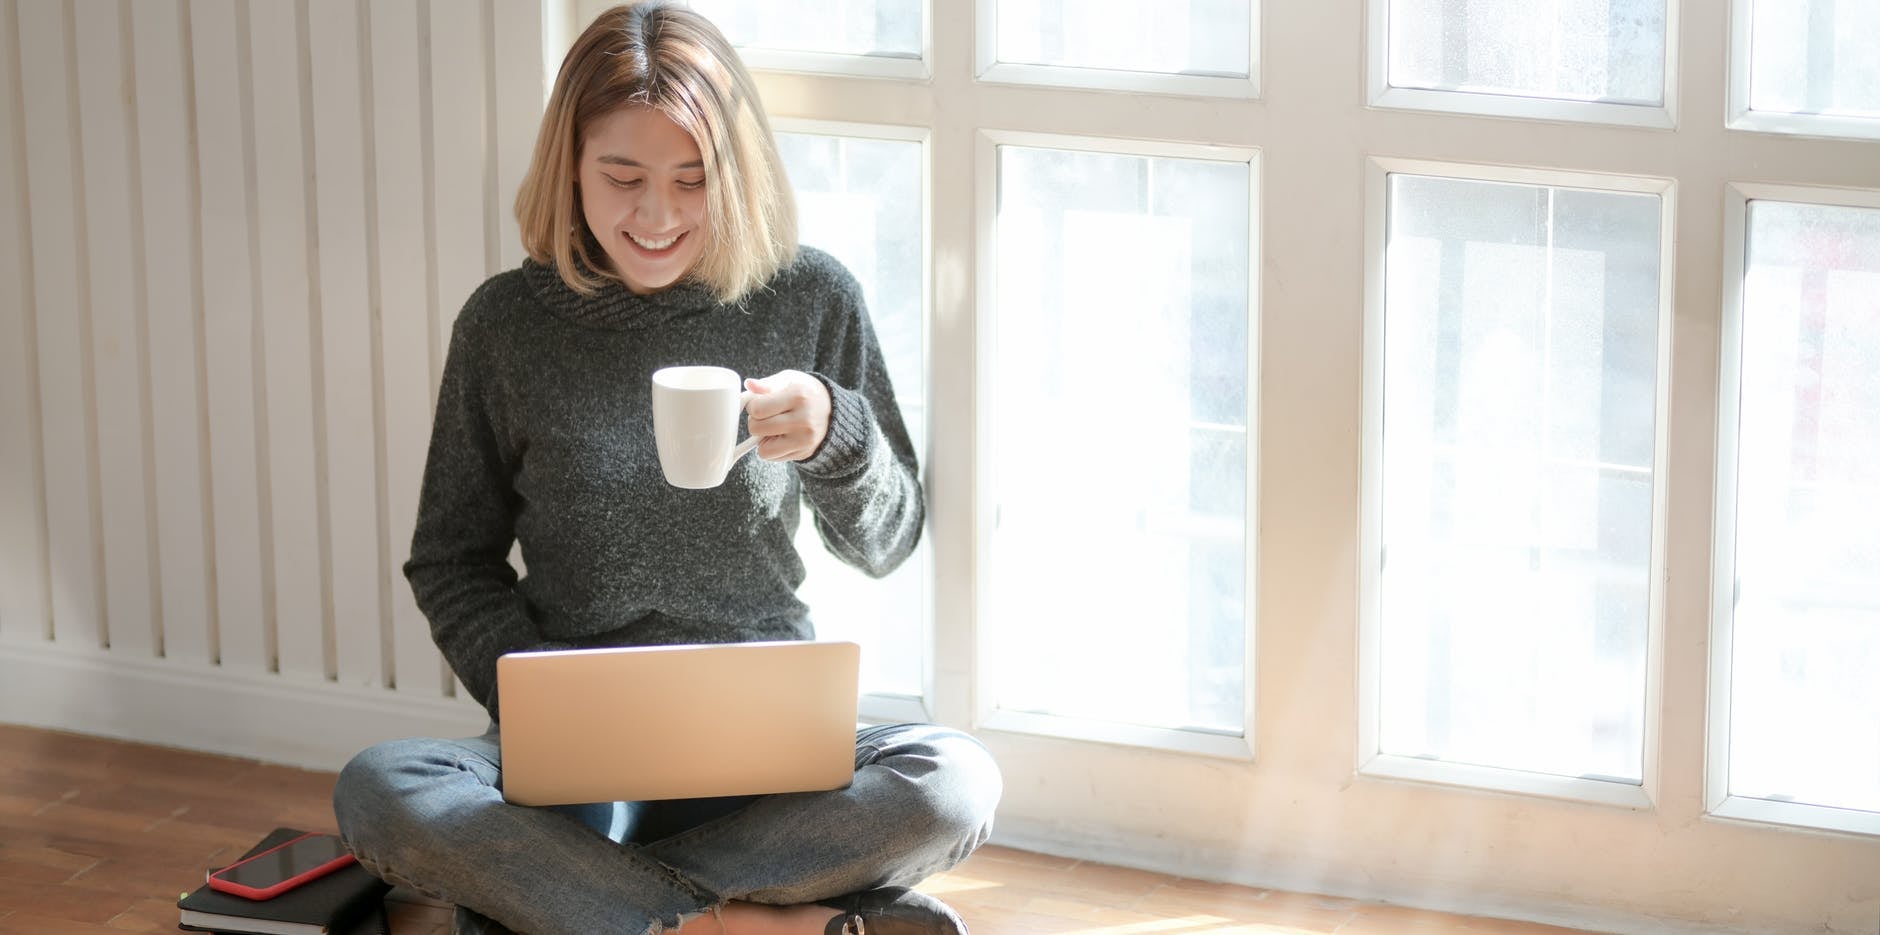 woman working on laptop while holding a mug